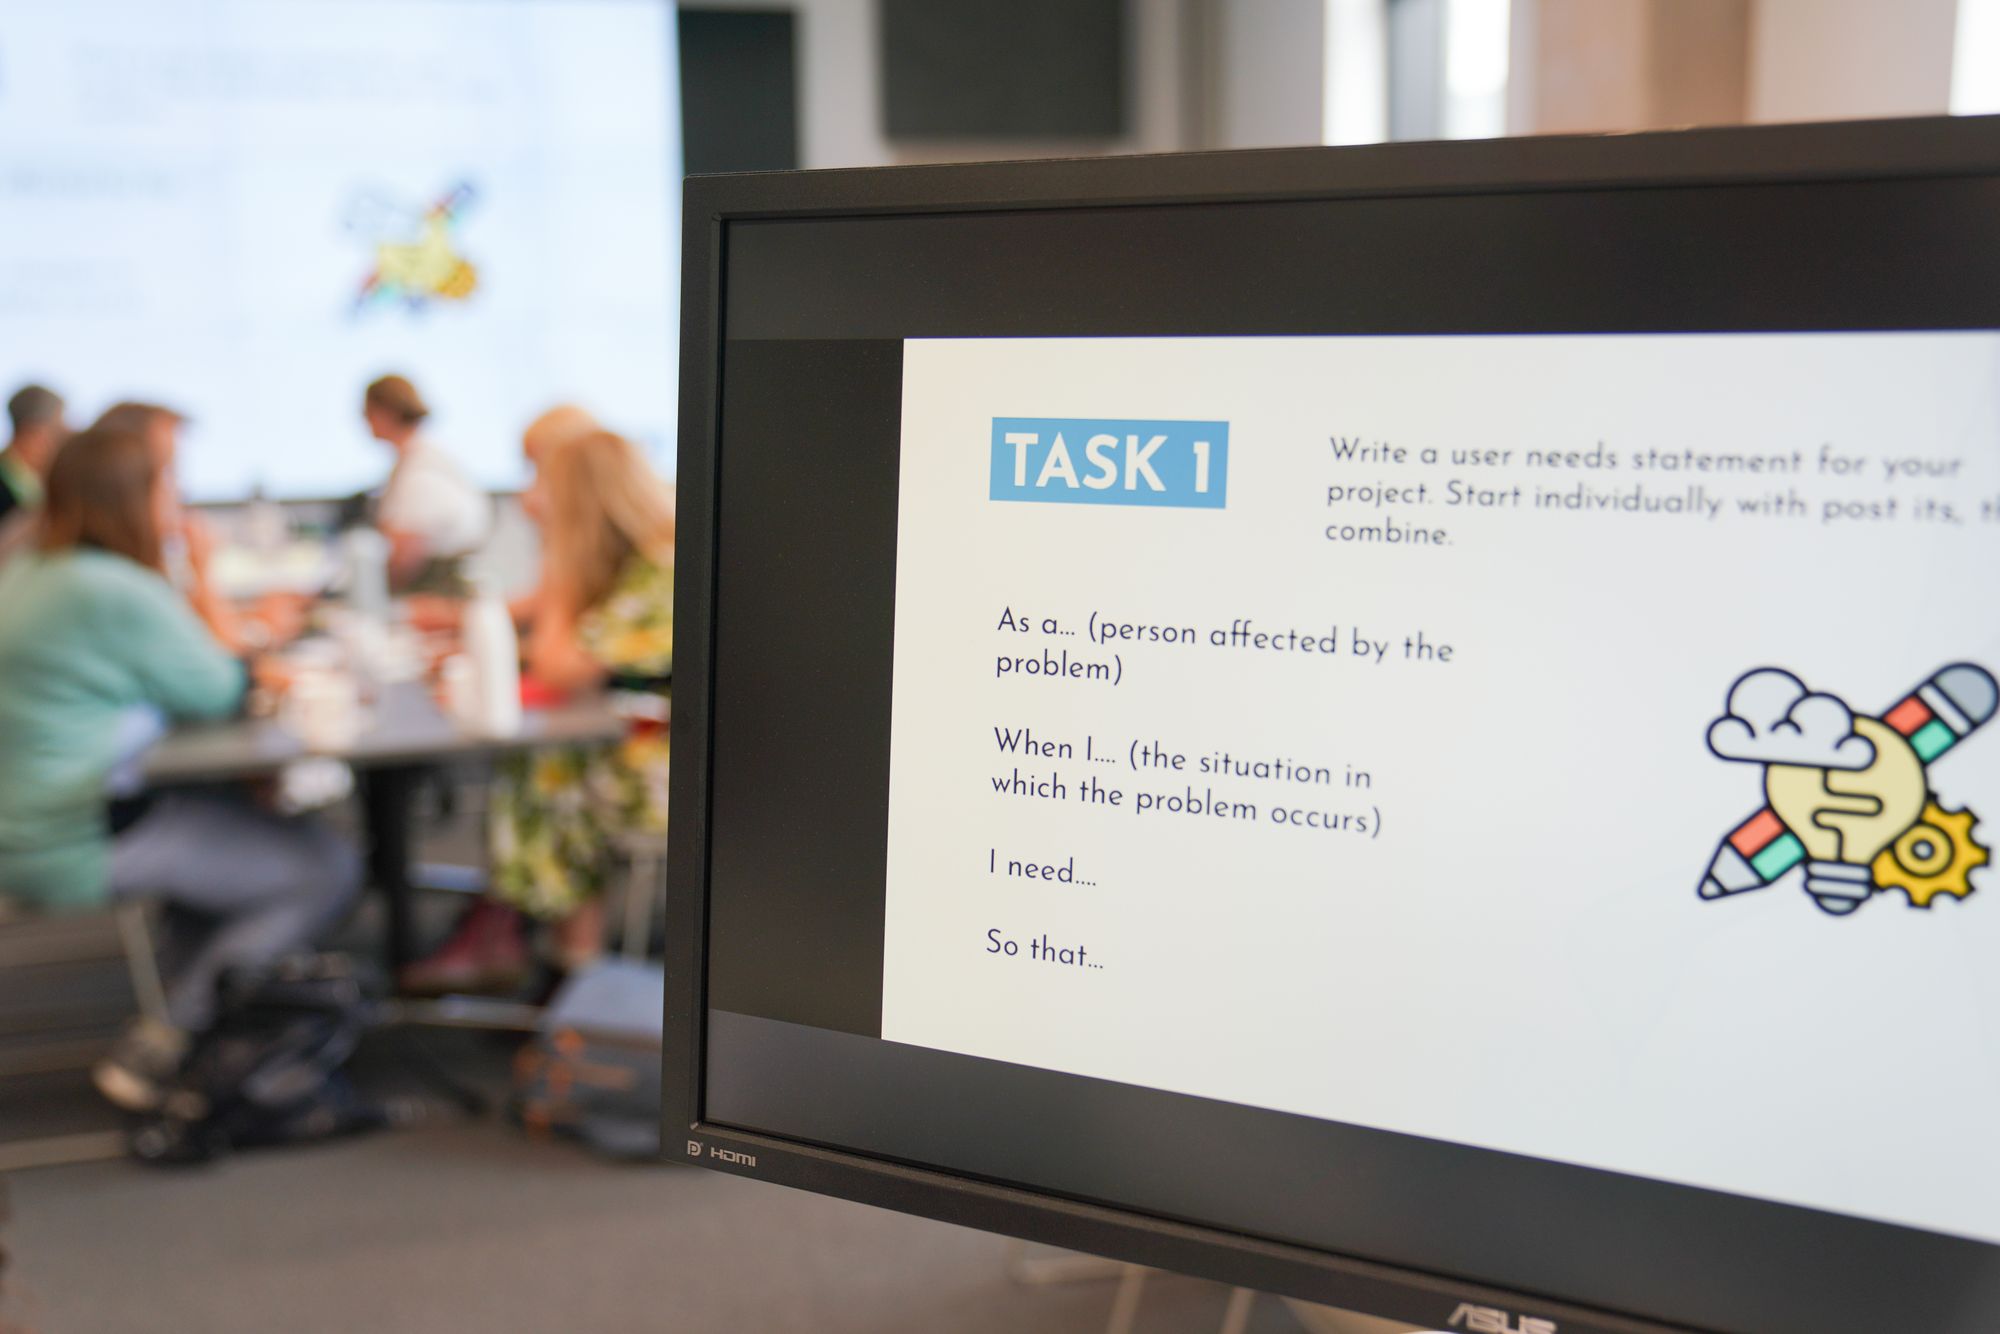 A presentation on a computer screen that says ‘Task 1’. Blurred groups of people collaboratively working at desks in the background.